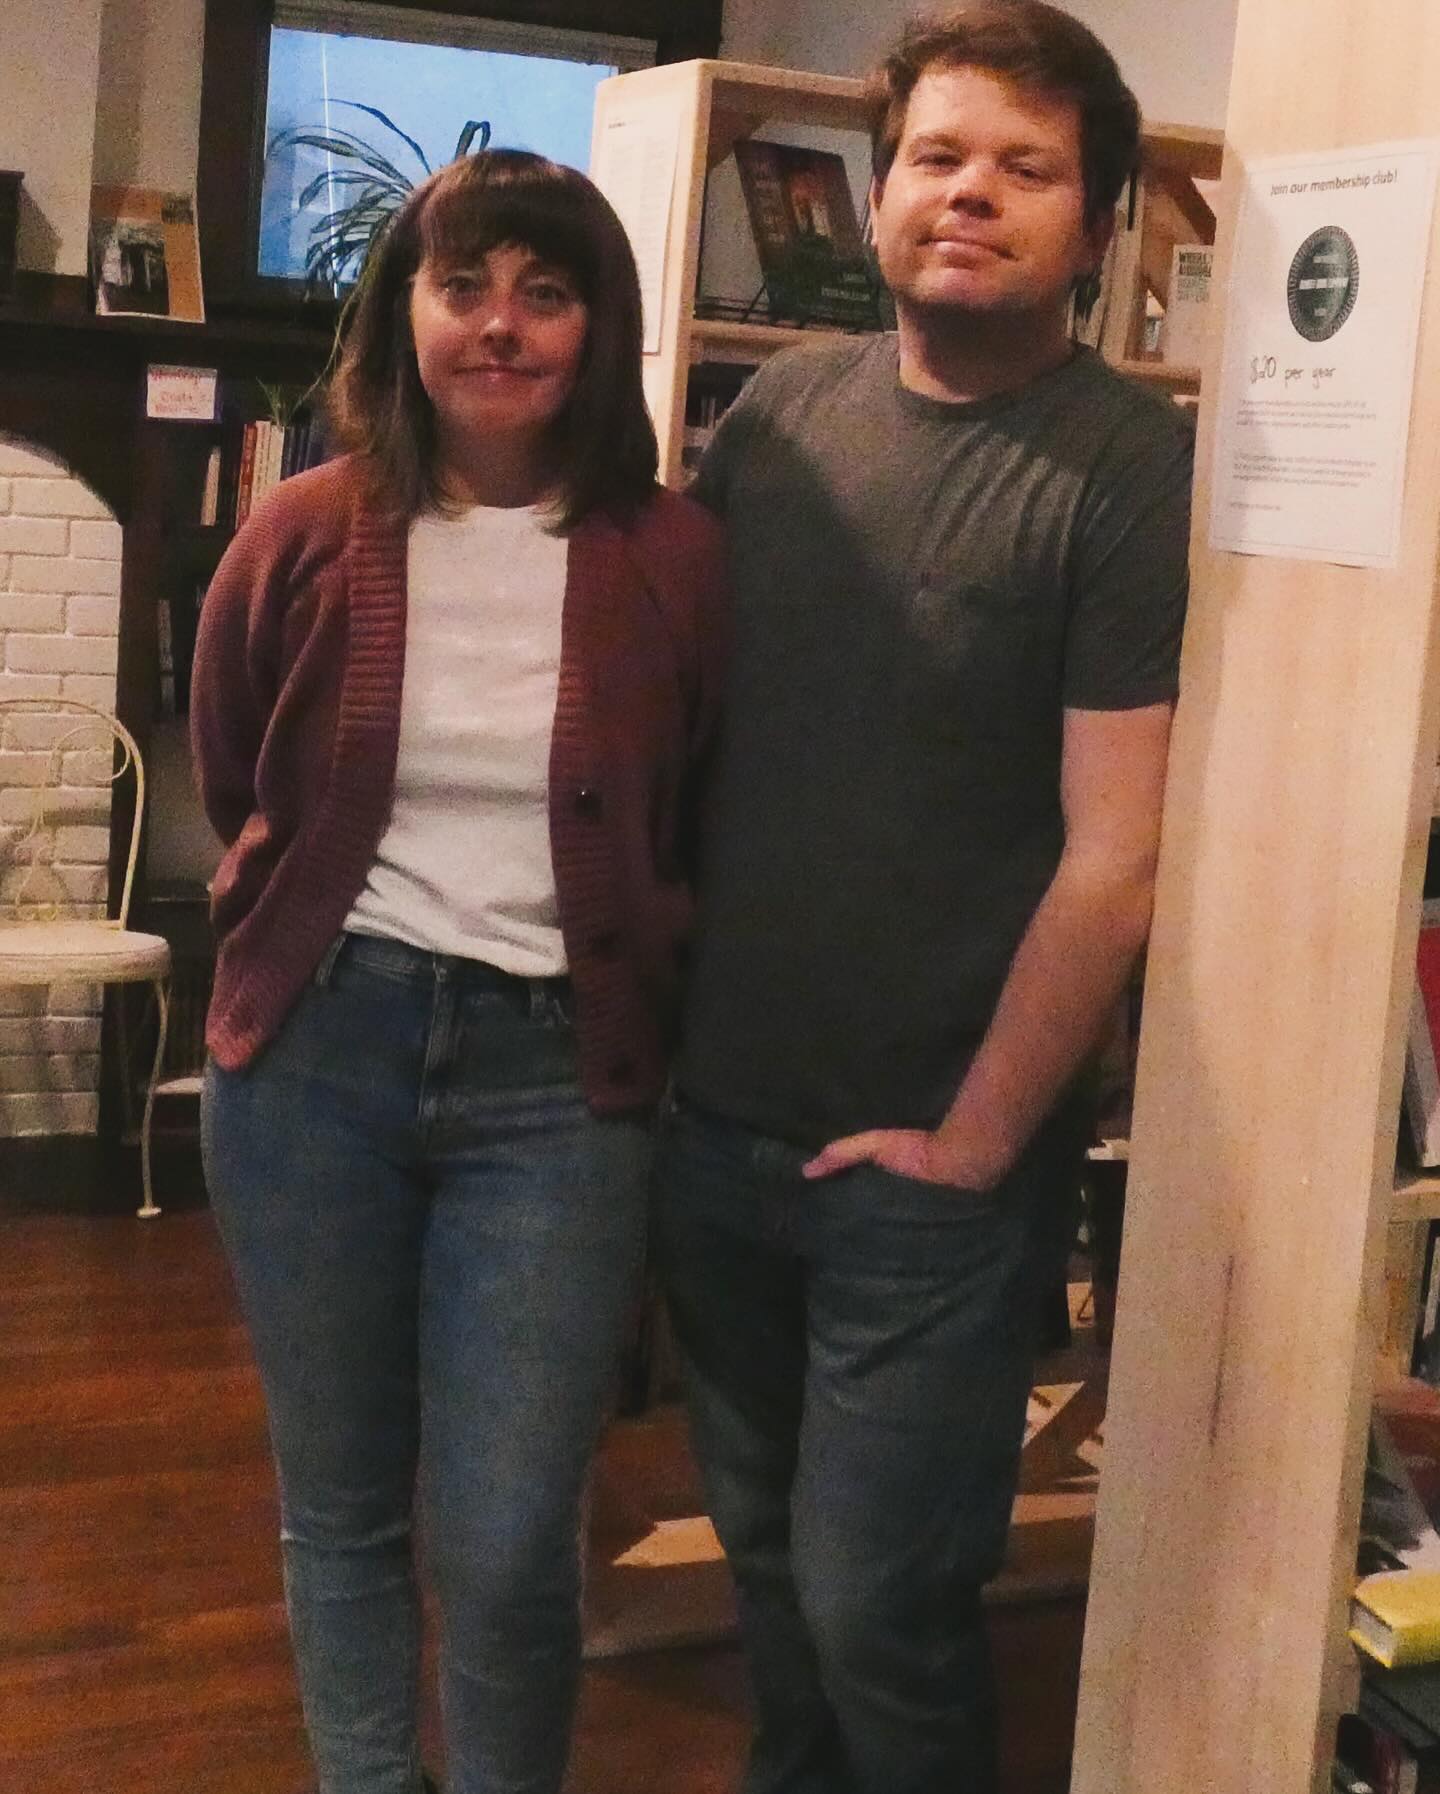 Nicole and Ted Wheeler stand in front of a row of bookshelves.